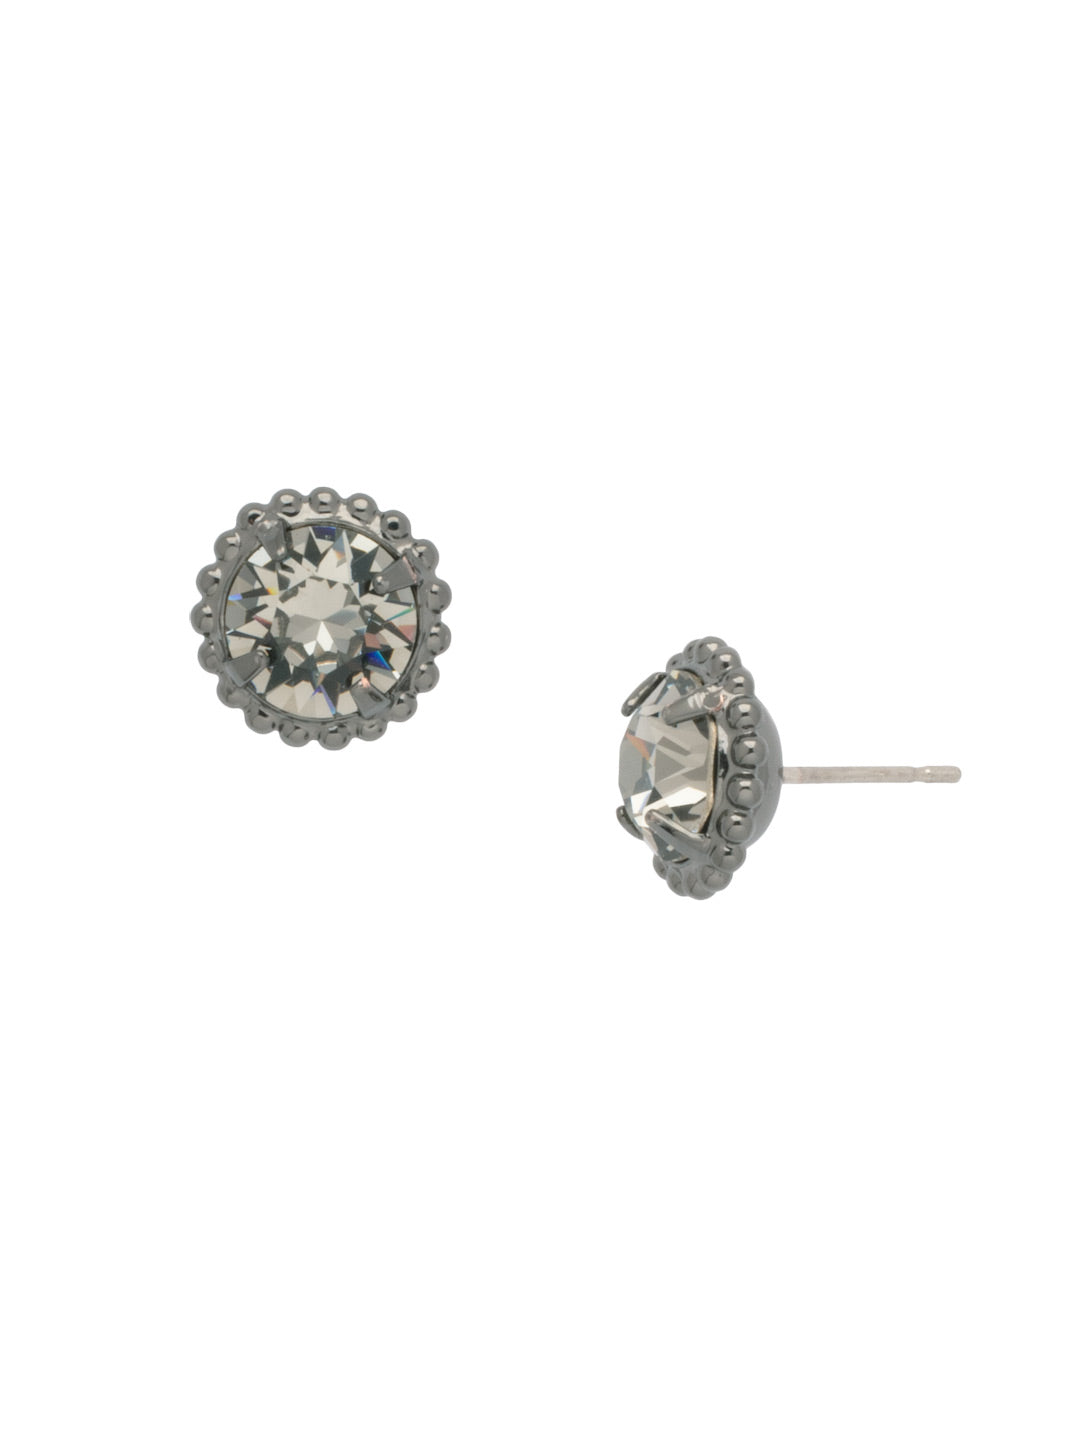 Simplicity Stud Earrings - EBY38GMBD - <p>A timeless classic, the Simplicity Stud Earrings feature round cut crystals in a variety of colors; accented with a halo of metal beaded detail. Need help picking a stud? <a href="https://www.sorrelli.com/blogs/sisterhood/round-stud-earrings-101-a-rundown-of-sizes-styles-and-sparkle">Check out our size guide!</a> From Sorrelli's Black Diamond collection in our Gun Metal finish.</p>